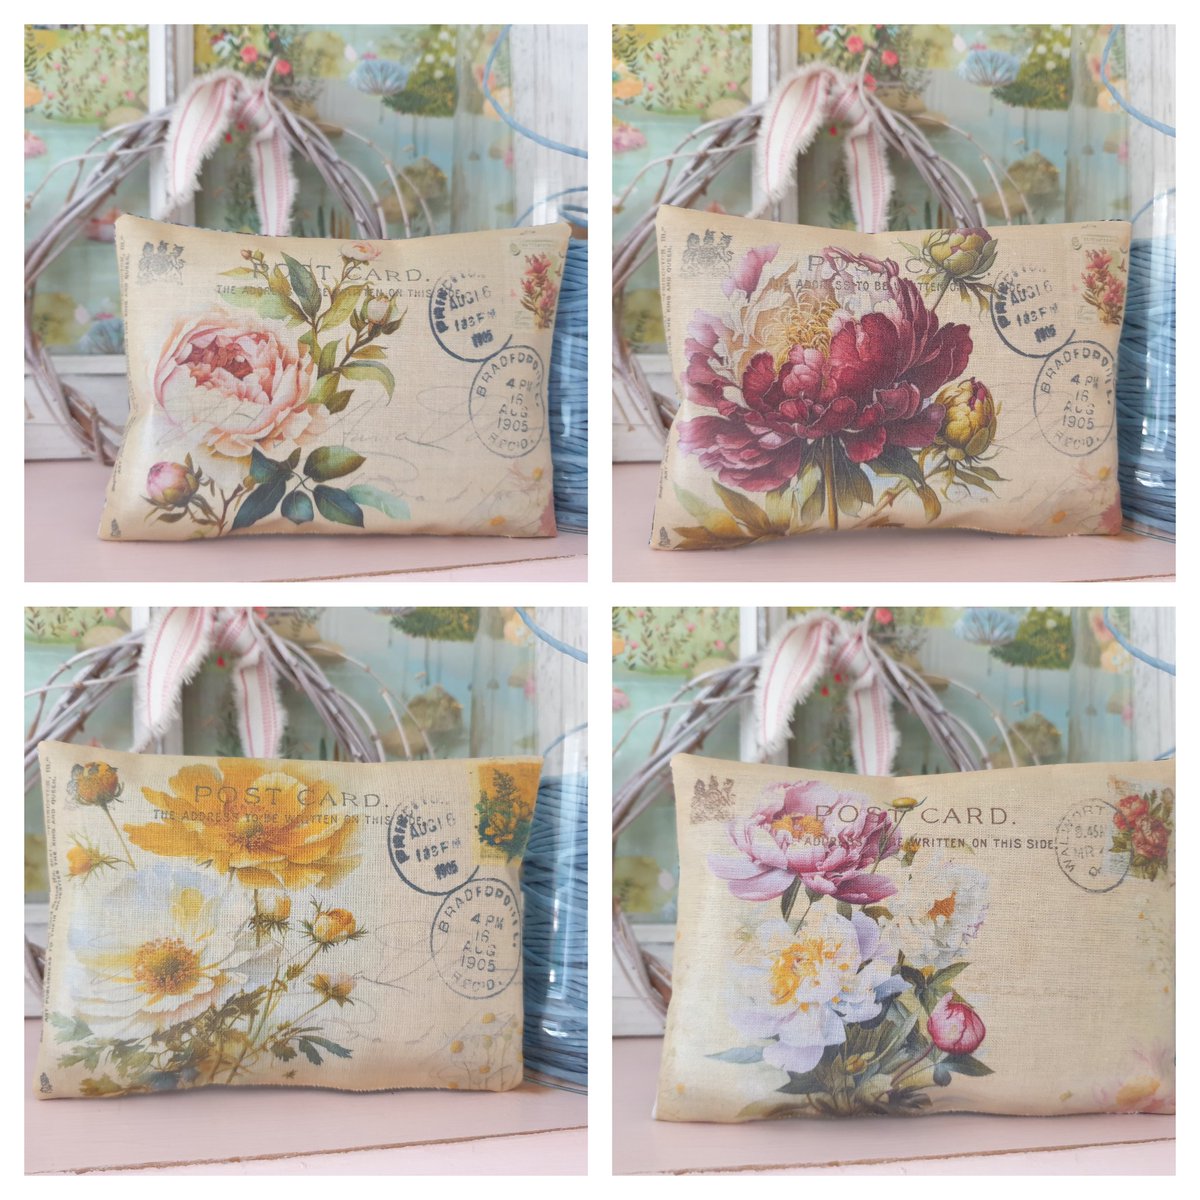 Happy Tuesday #earlybiz Pretty floral postcard pillows scented with lavender or rose petals. Perfect little gifts for someone special #etsyshop #giftideas sarahbenning.etsy.com/listing/165390…